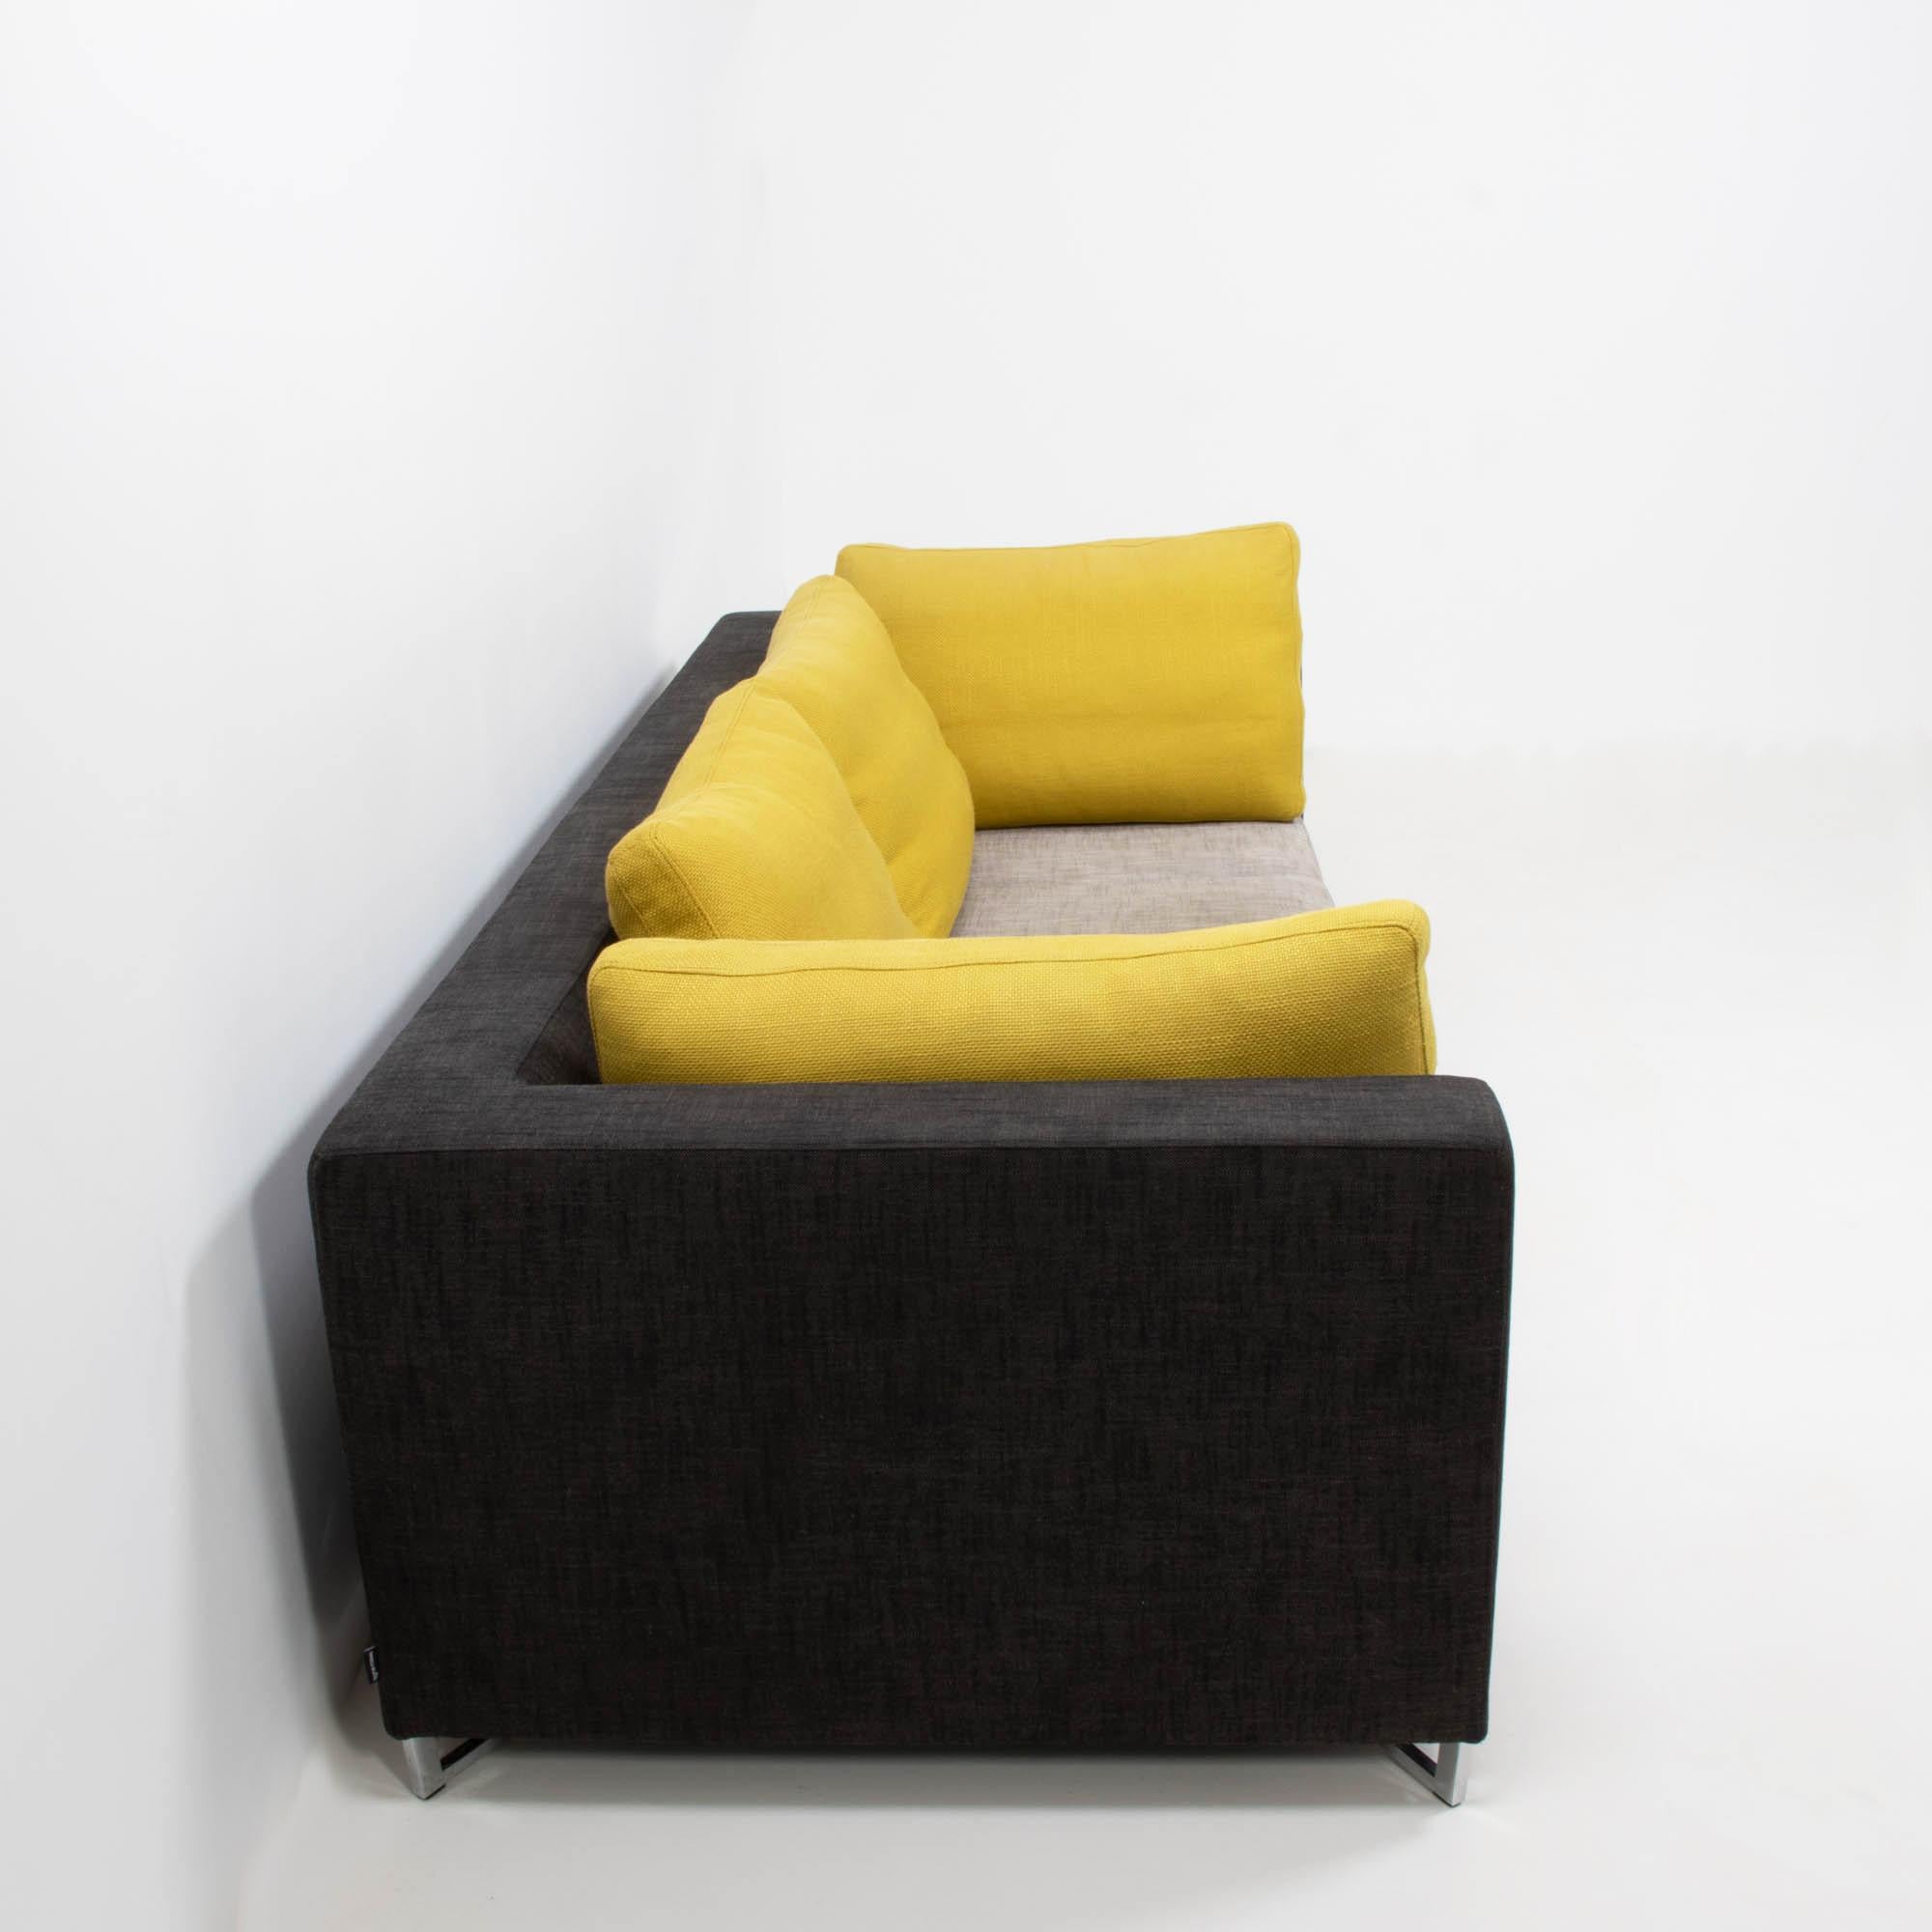 French Ligne Roset by Didier Gomez Feng Grey and Yellow Three-Seat Feng Sofa, 2004